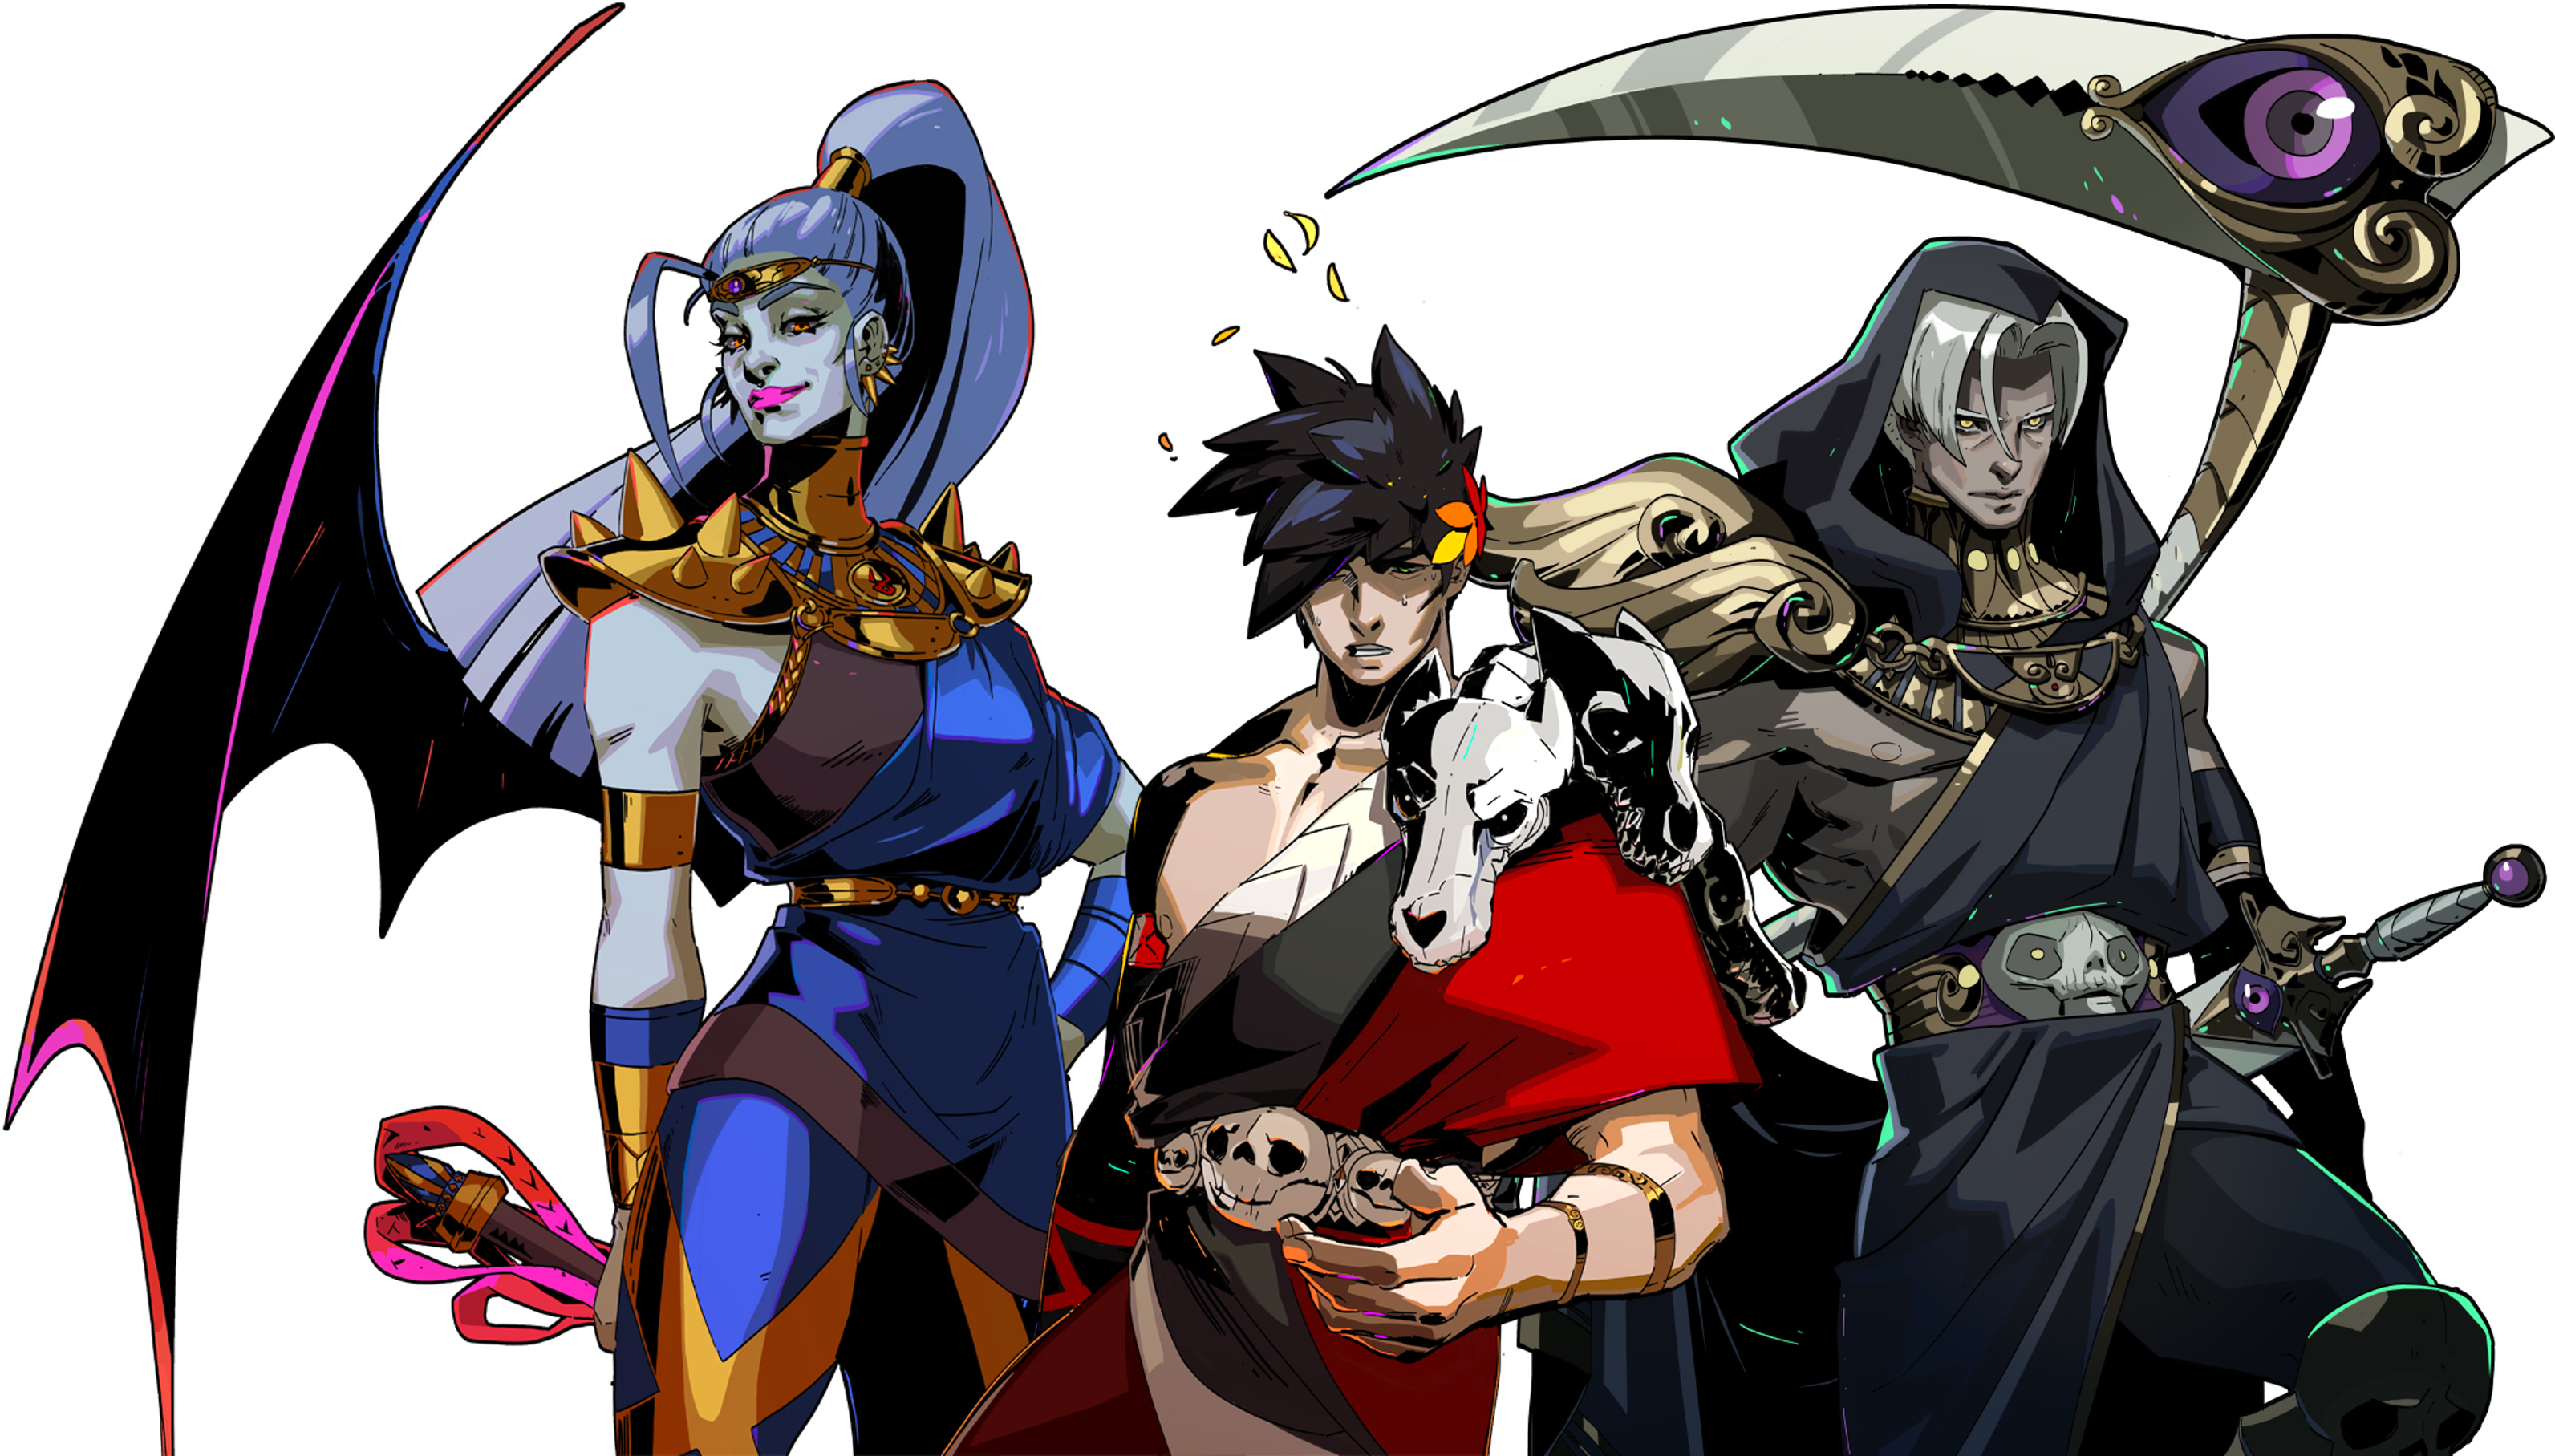 From left to right, a picture of happy Megaera, sweaty Zagreus, and serious Thanatos.